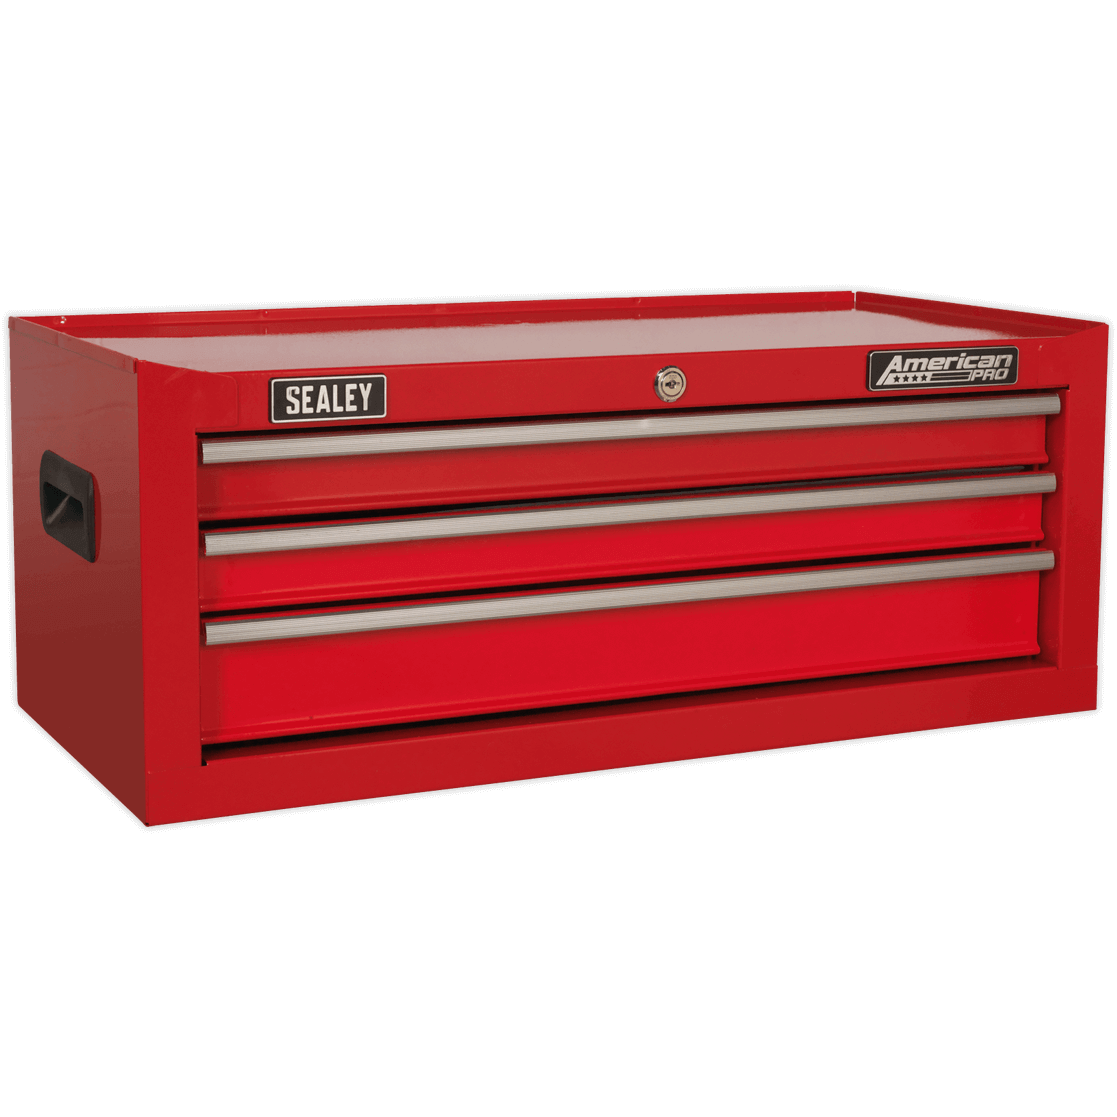 Sealey American Pro 3 Drawer Mid Tool Chest Red